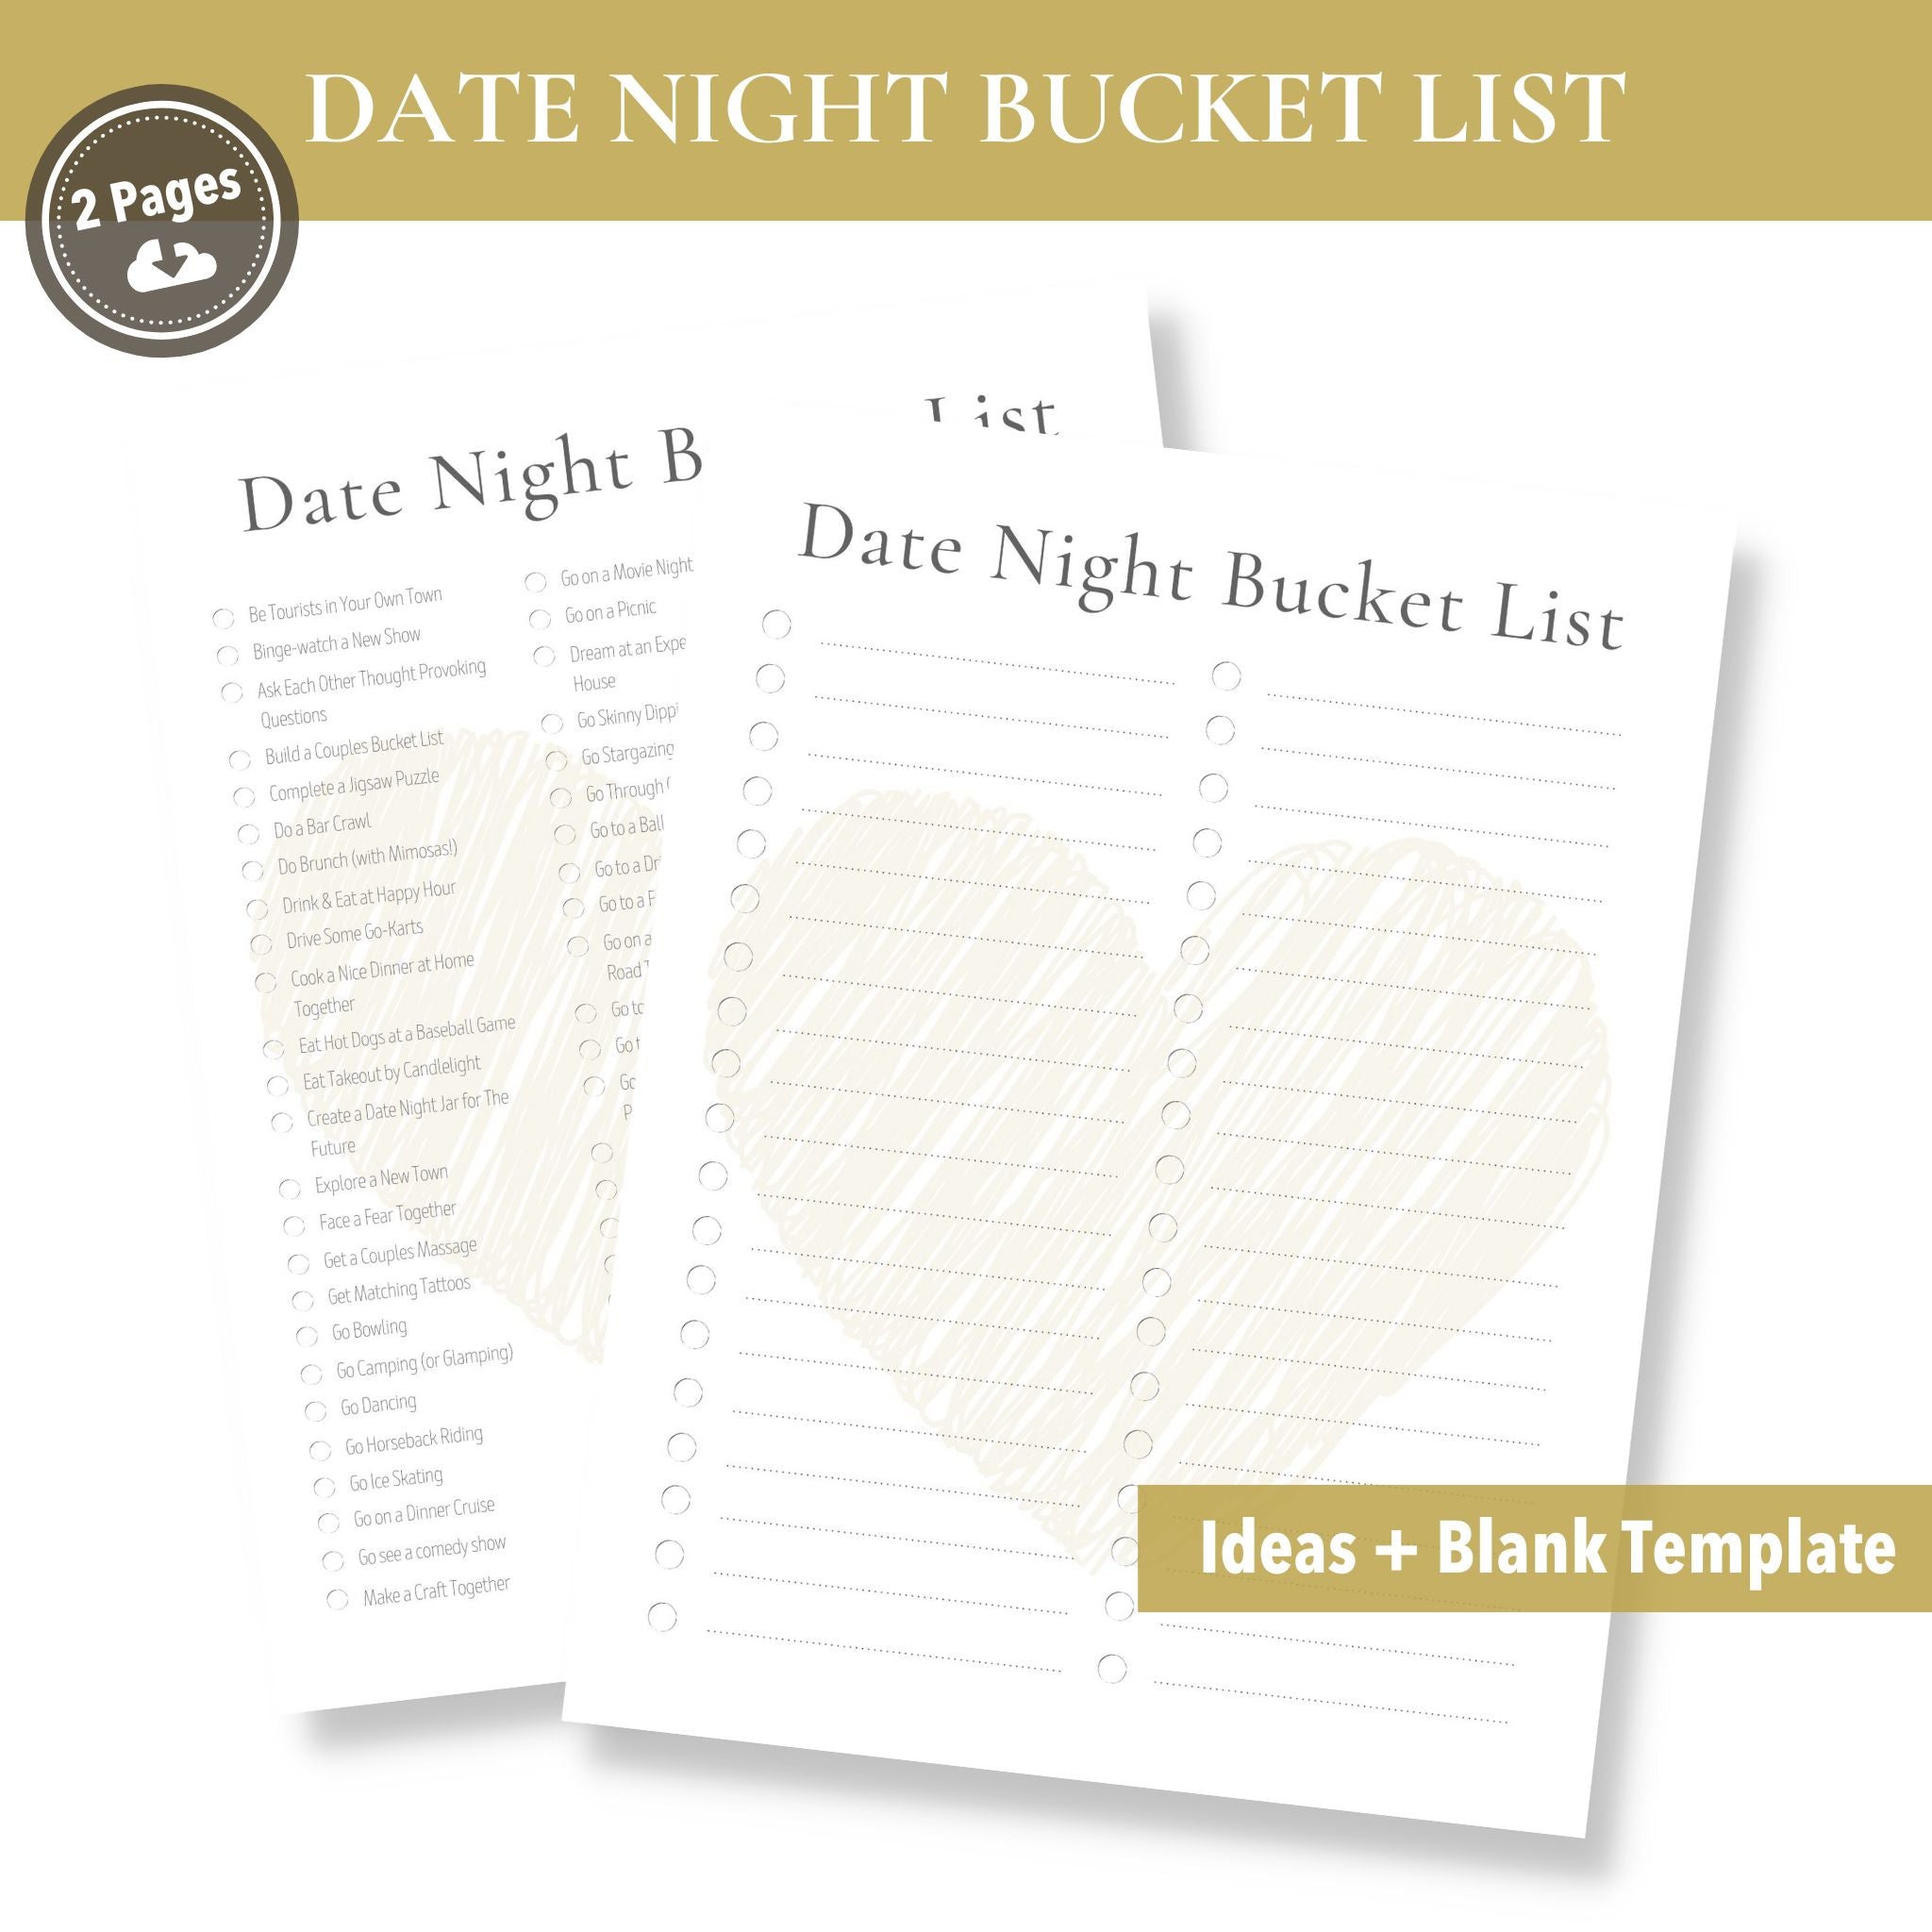 Date Night Bucket List: 75 Cute Ideas for a Perfectly Fun Evening